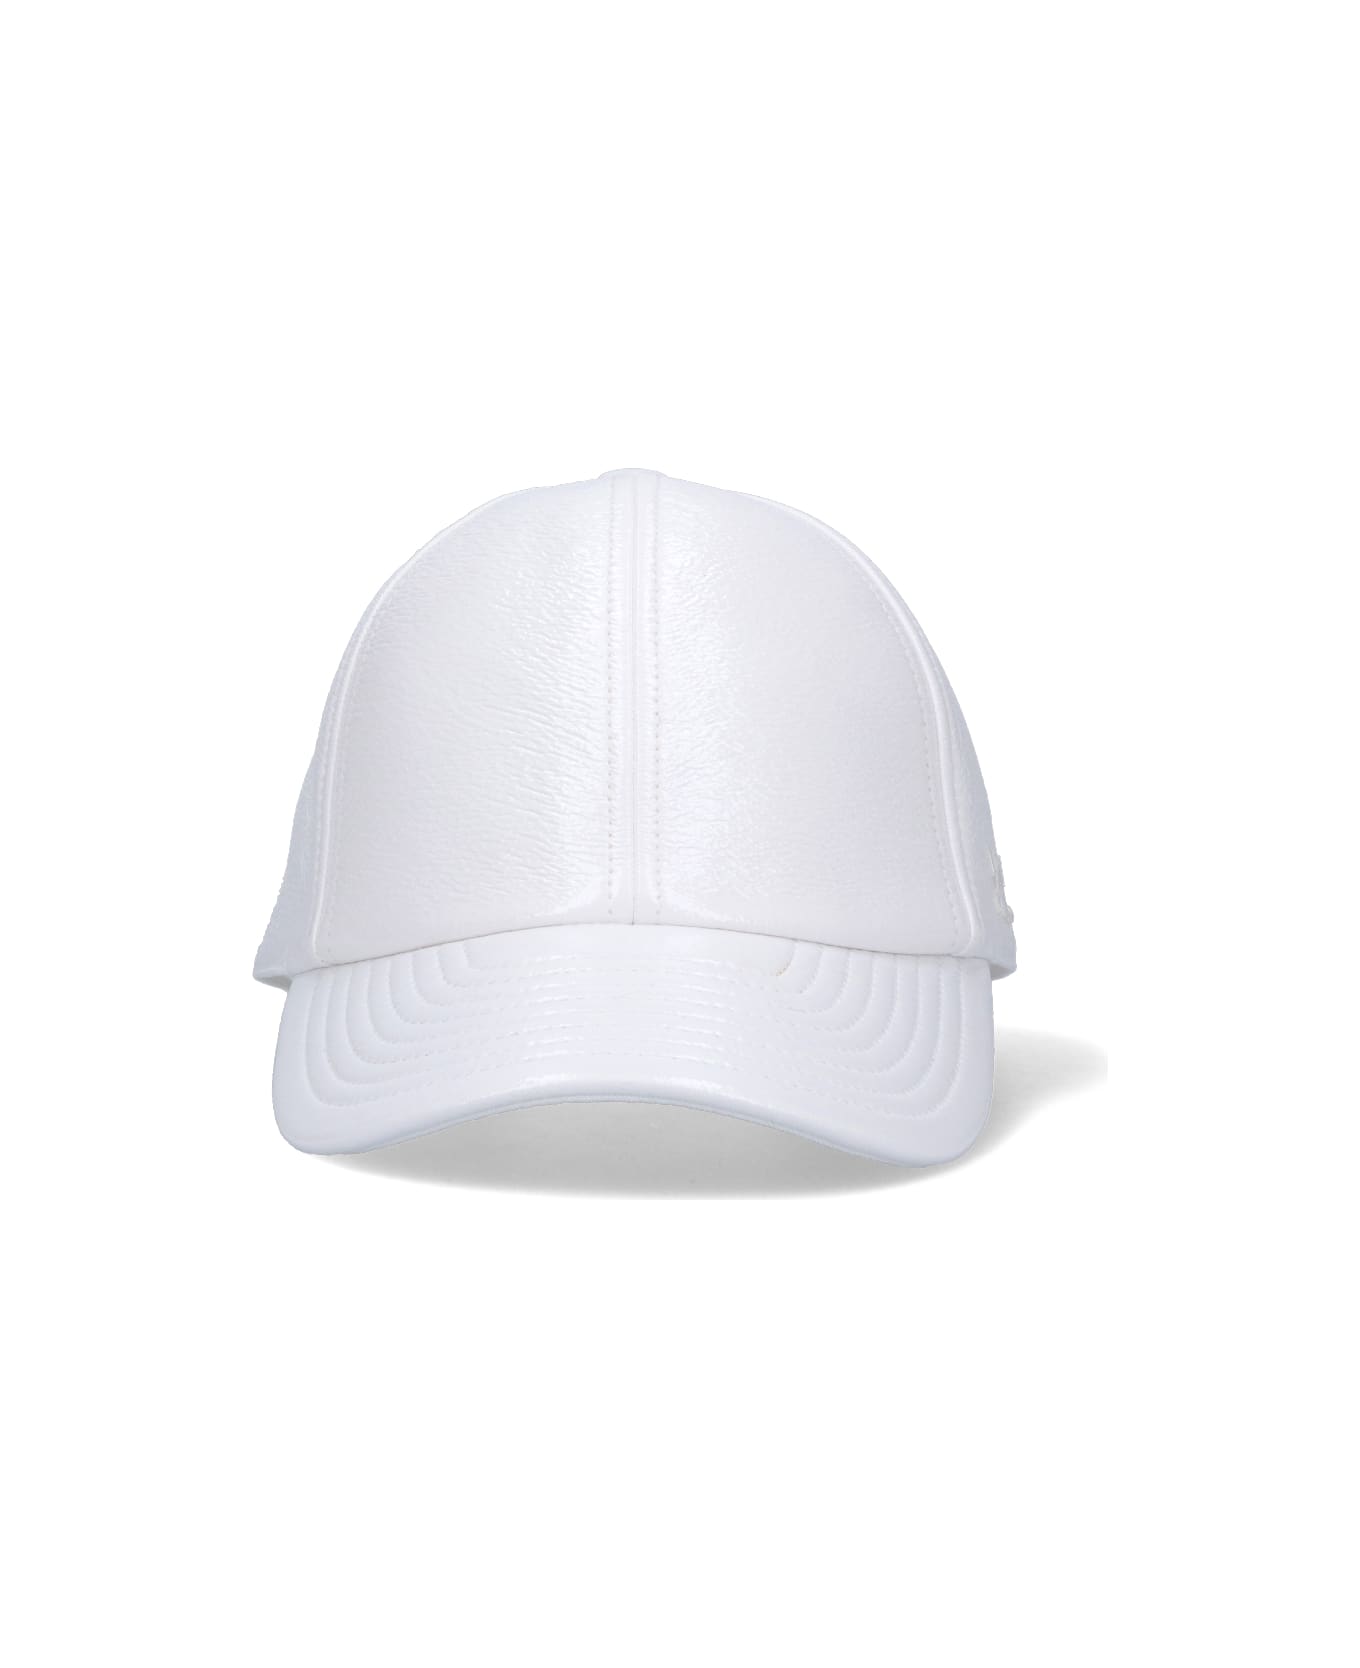 Courrèges Vynil Reedition Baseball Cap - White